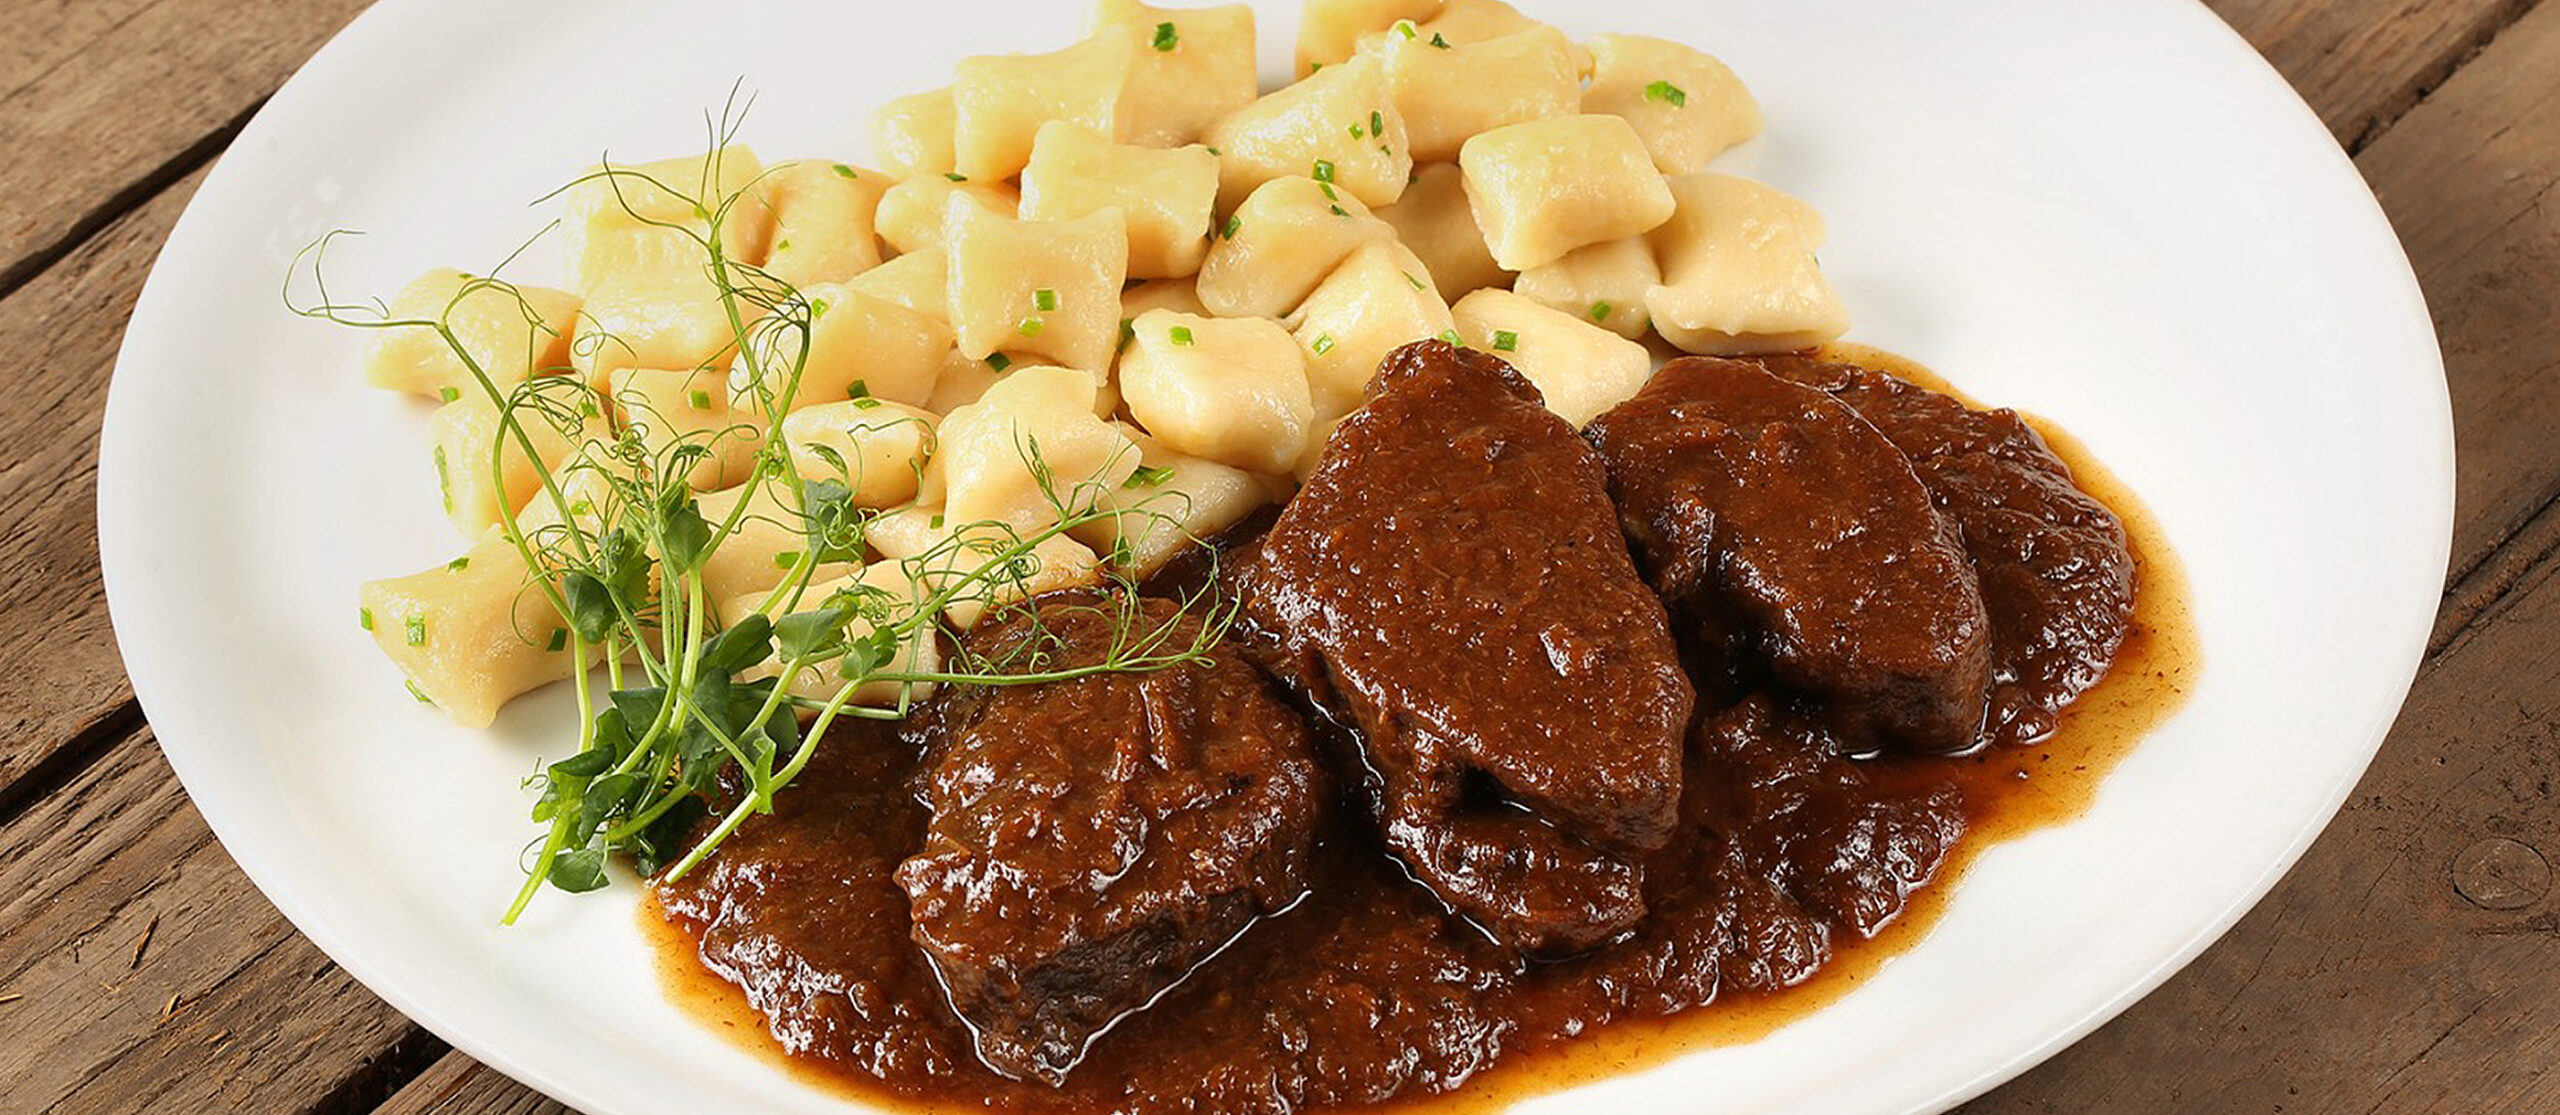 Image of Pašticada, traditional Dalmatian beef stew with gnocchi